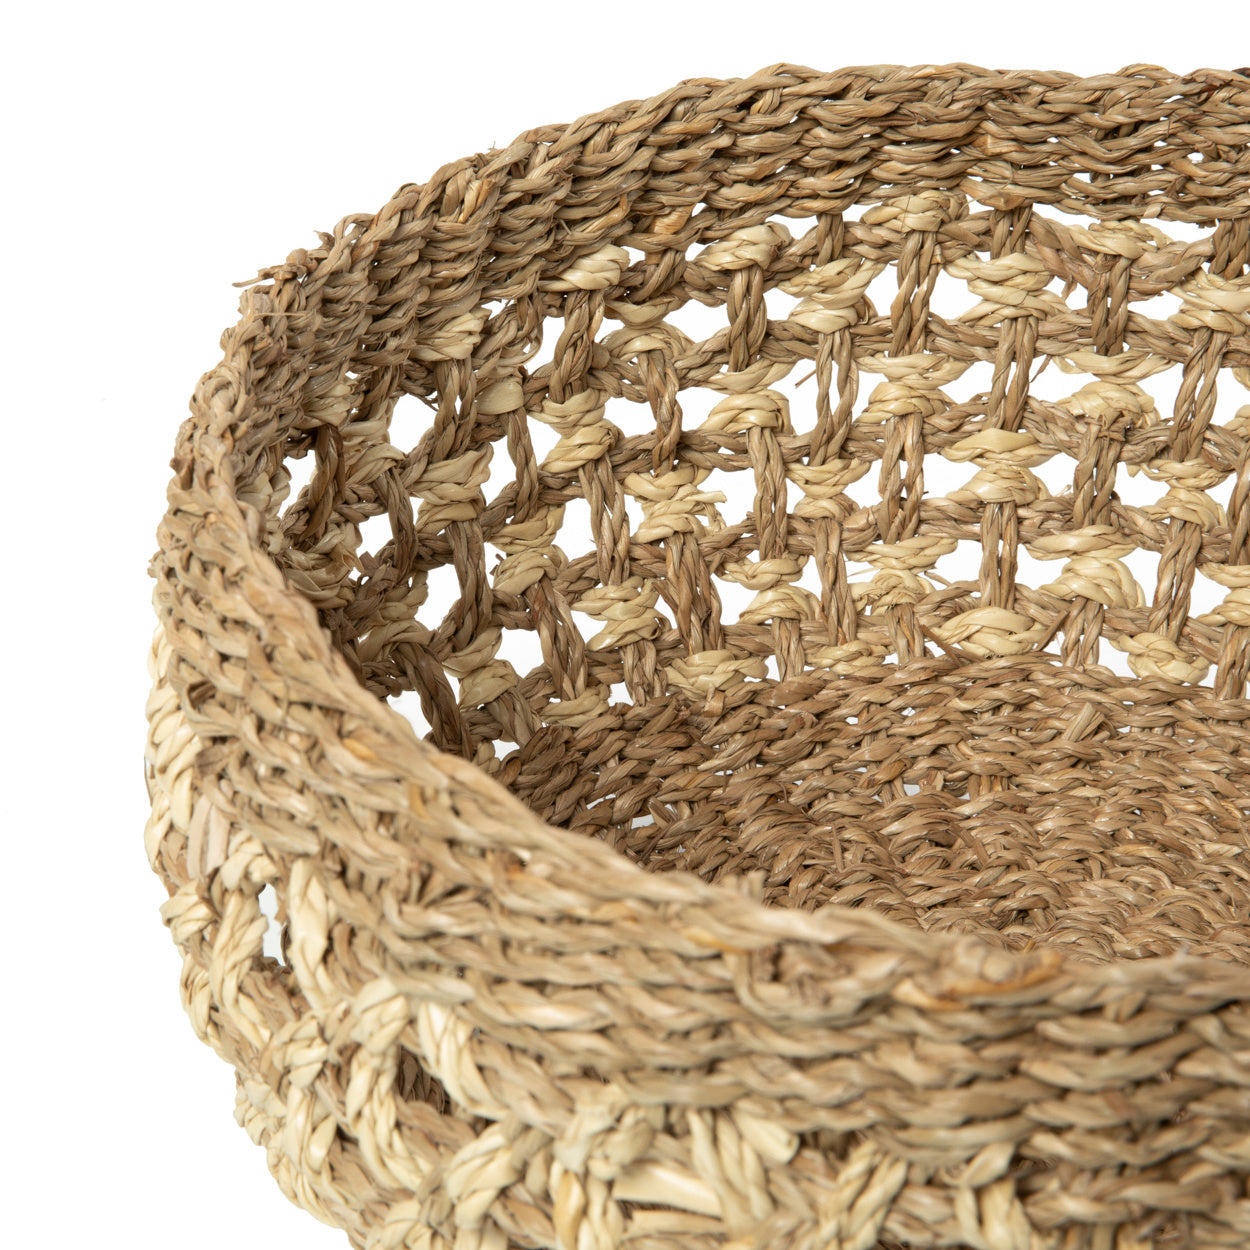 THE PHU QUOC Baskets Set of 3 top detail